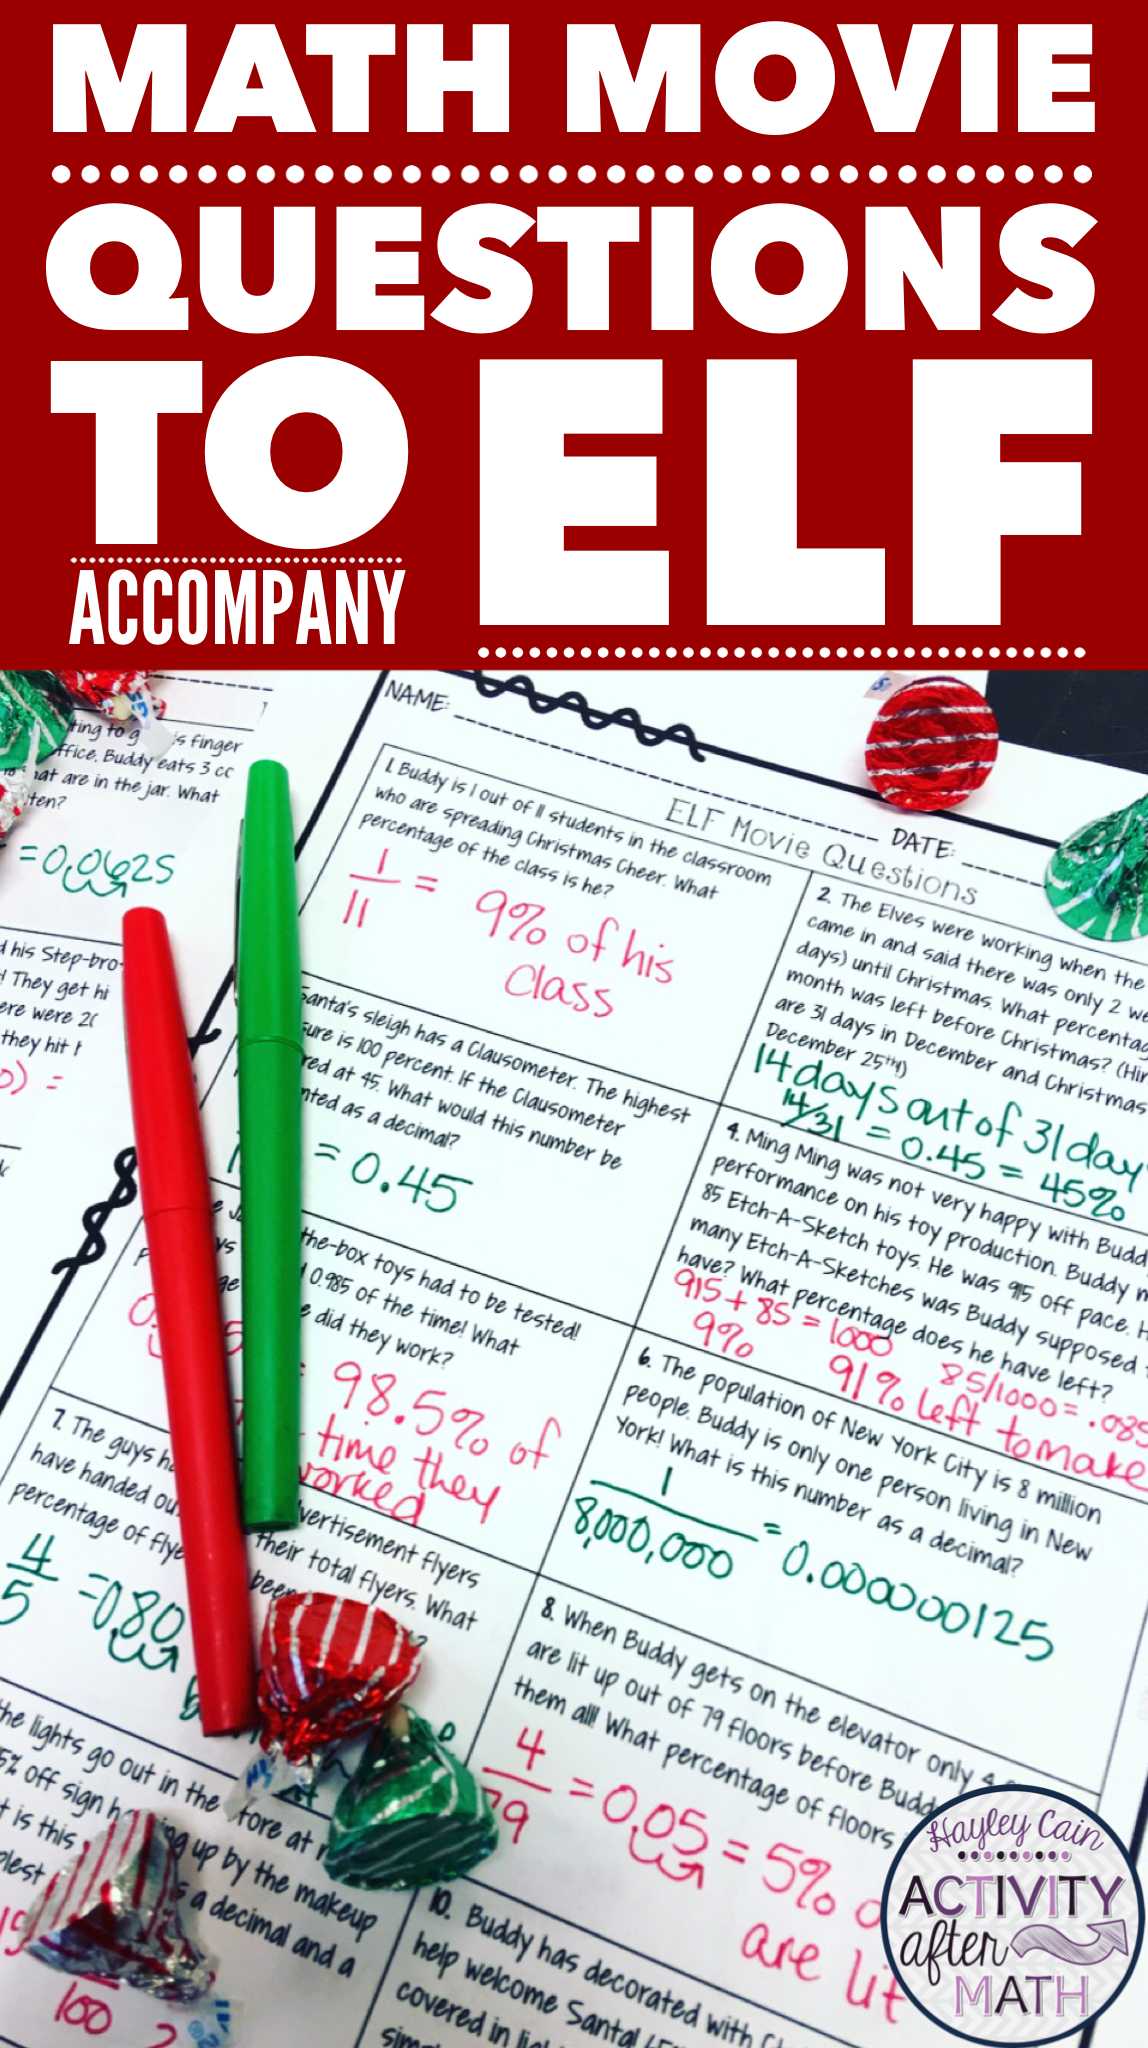 Operations with Decimals Review Worksheet Answer Key or Christmas Math Movie Questions to Ac Pany the Movie Elf